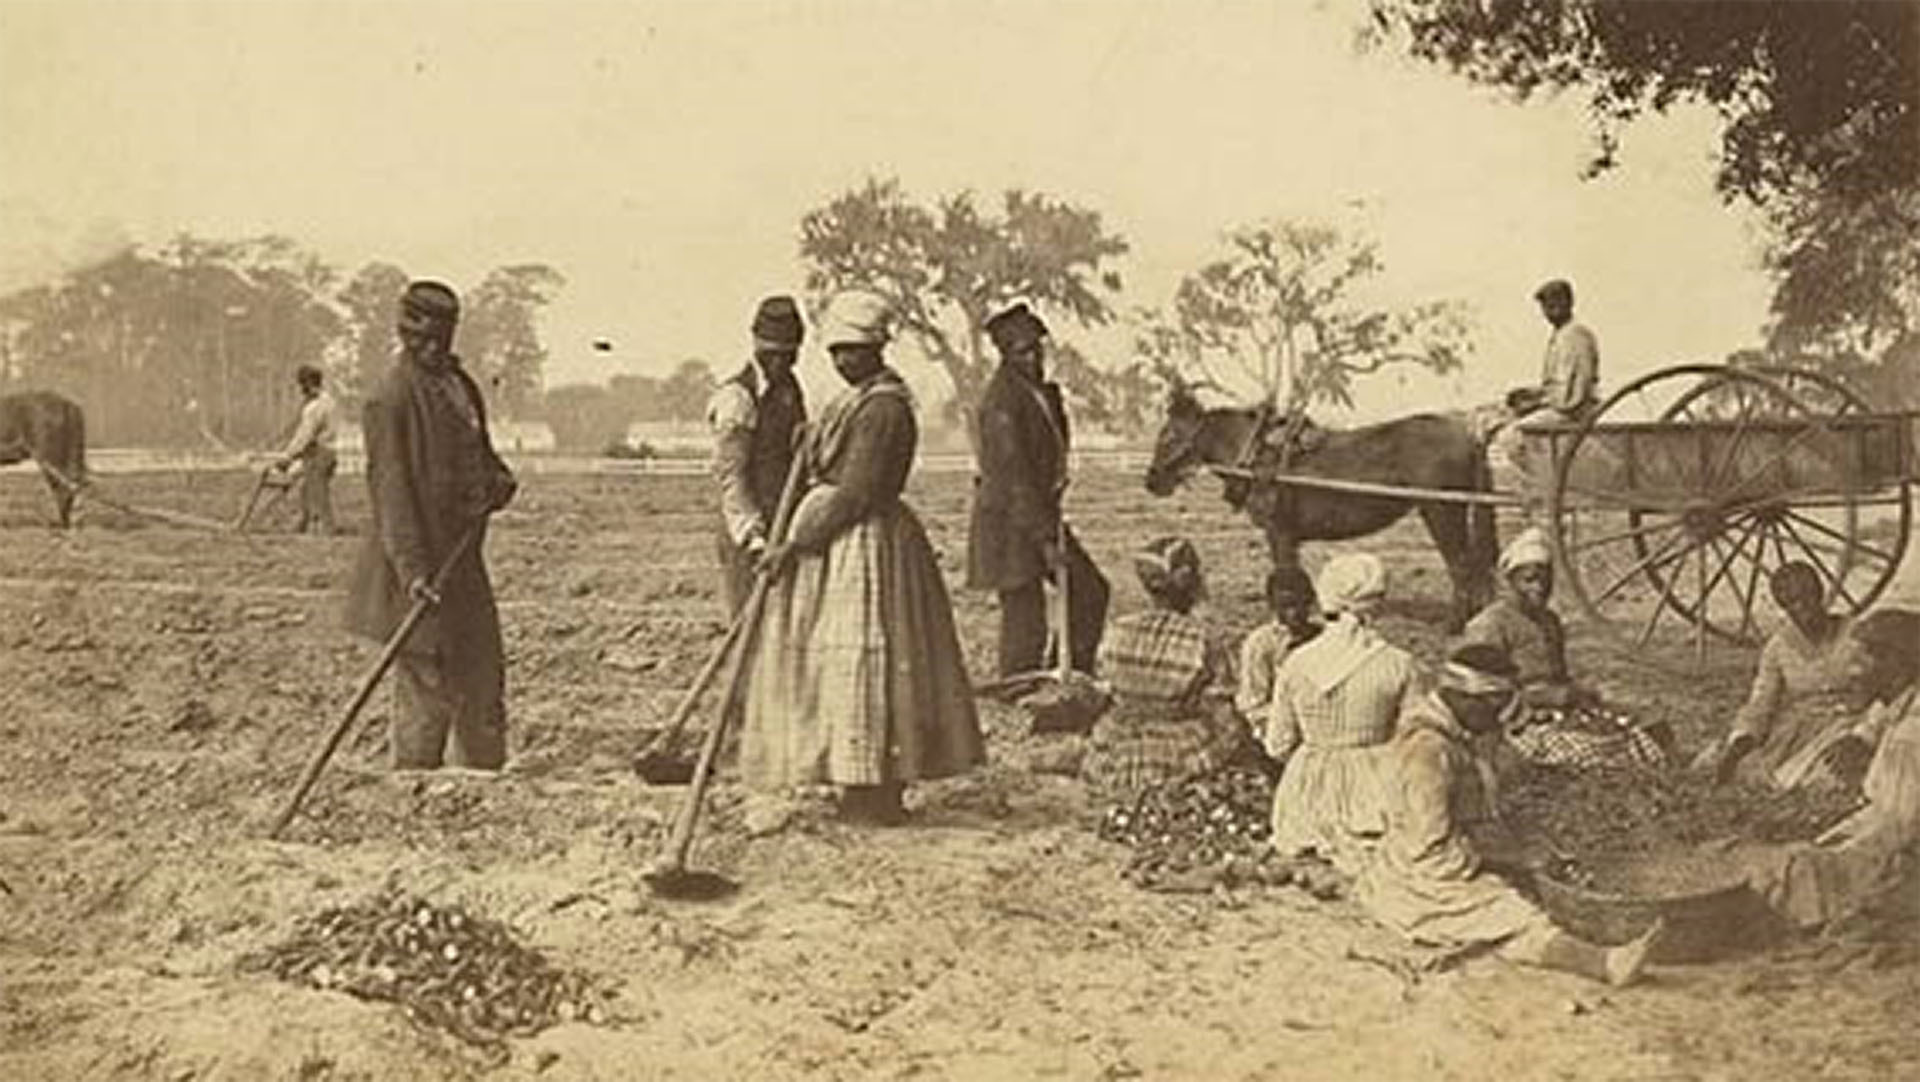 A sepia-toned photo shows African-American slaves working in the sweet potato fields on the Hopkinson plantation, South Carolina, in 1862.